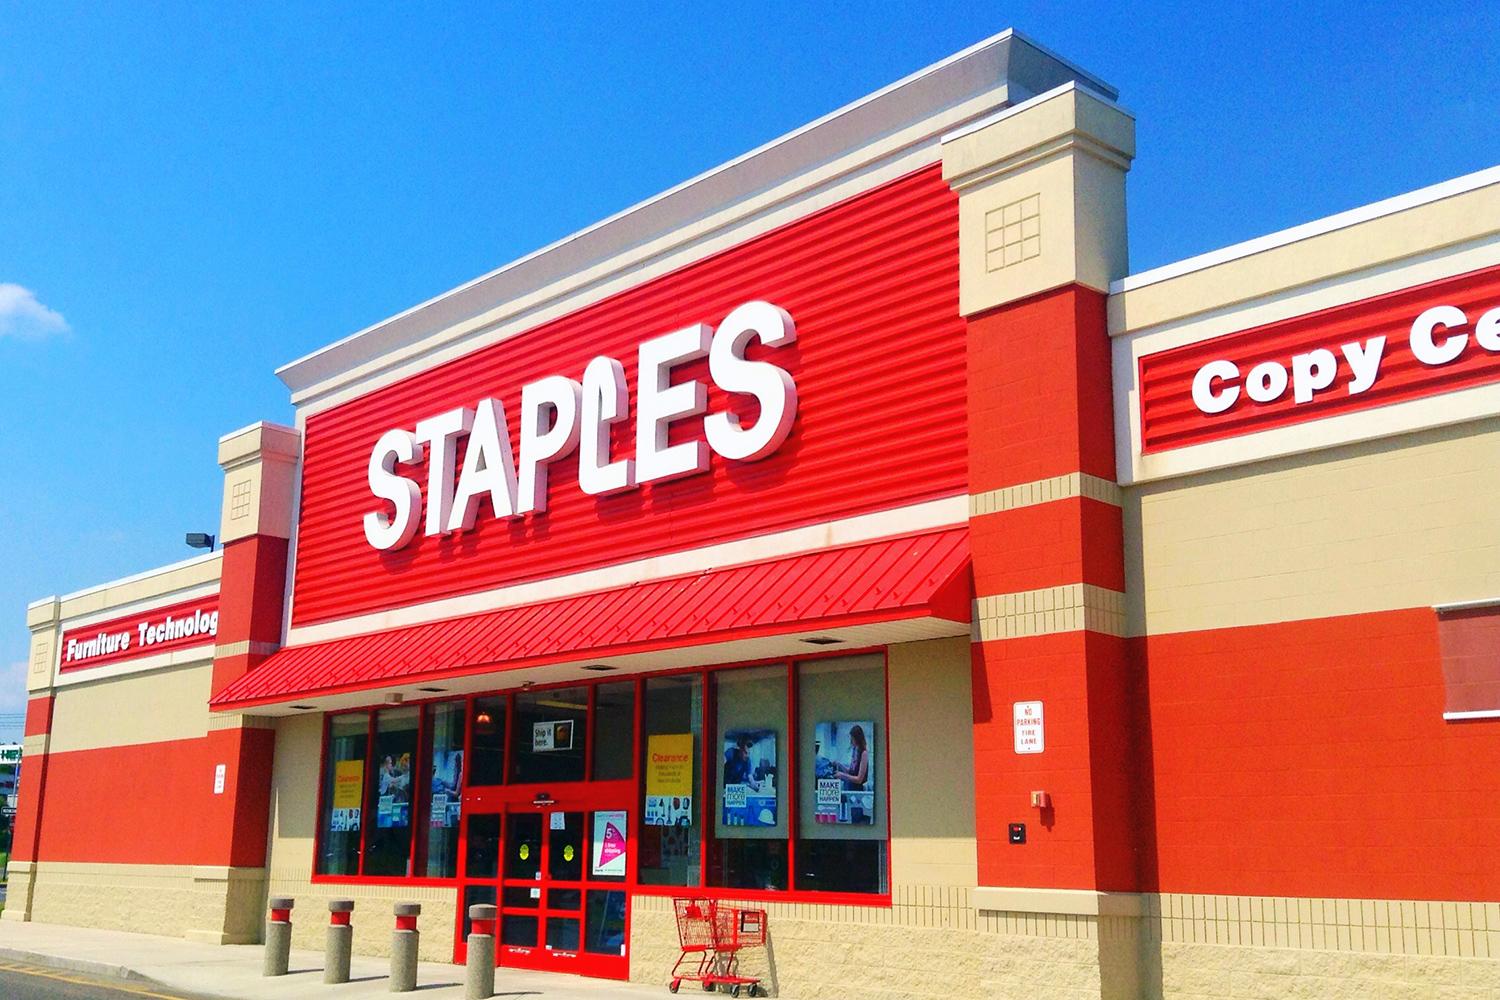 Best Staples deals and sales for July 2022